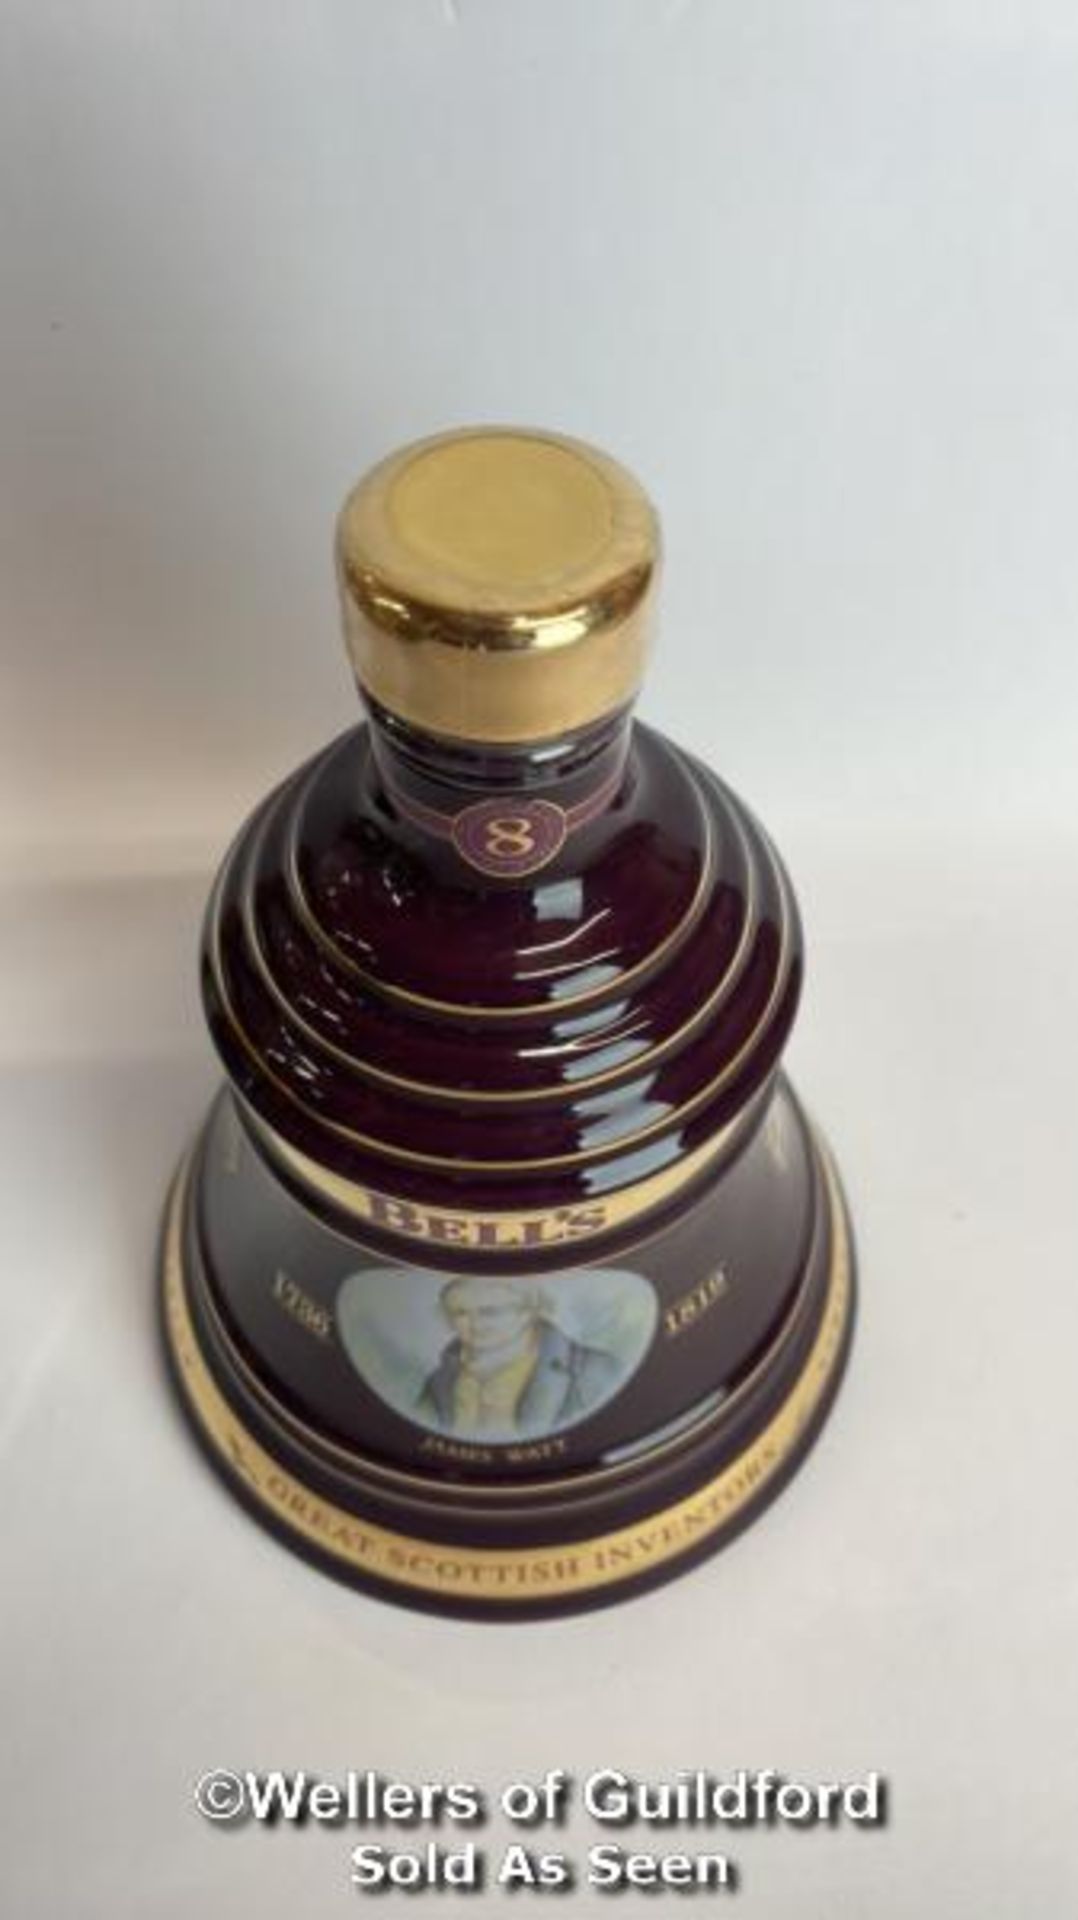 Bell's 2002 Old Scotch Whisky Limited Edition Christmas Decanter, Aged 8 Years, Brand New and Boxed, - Image 8 of 8